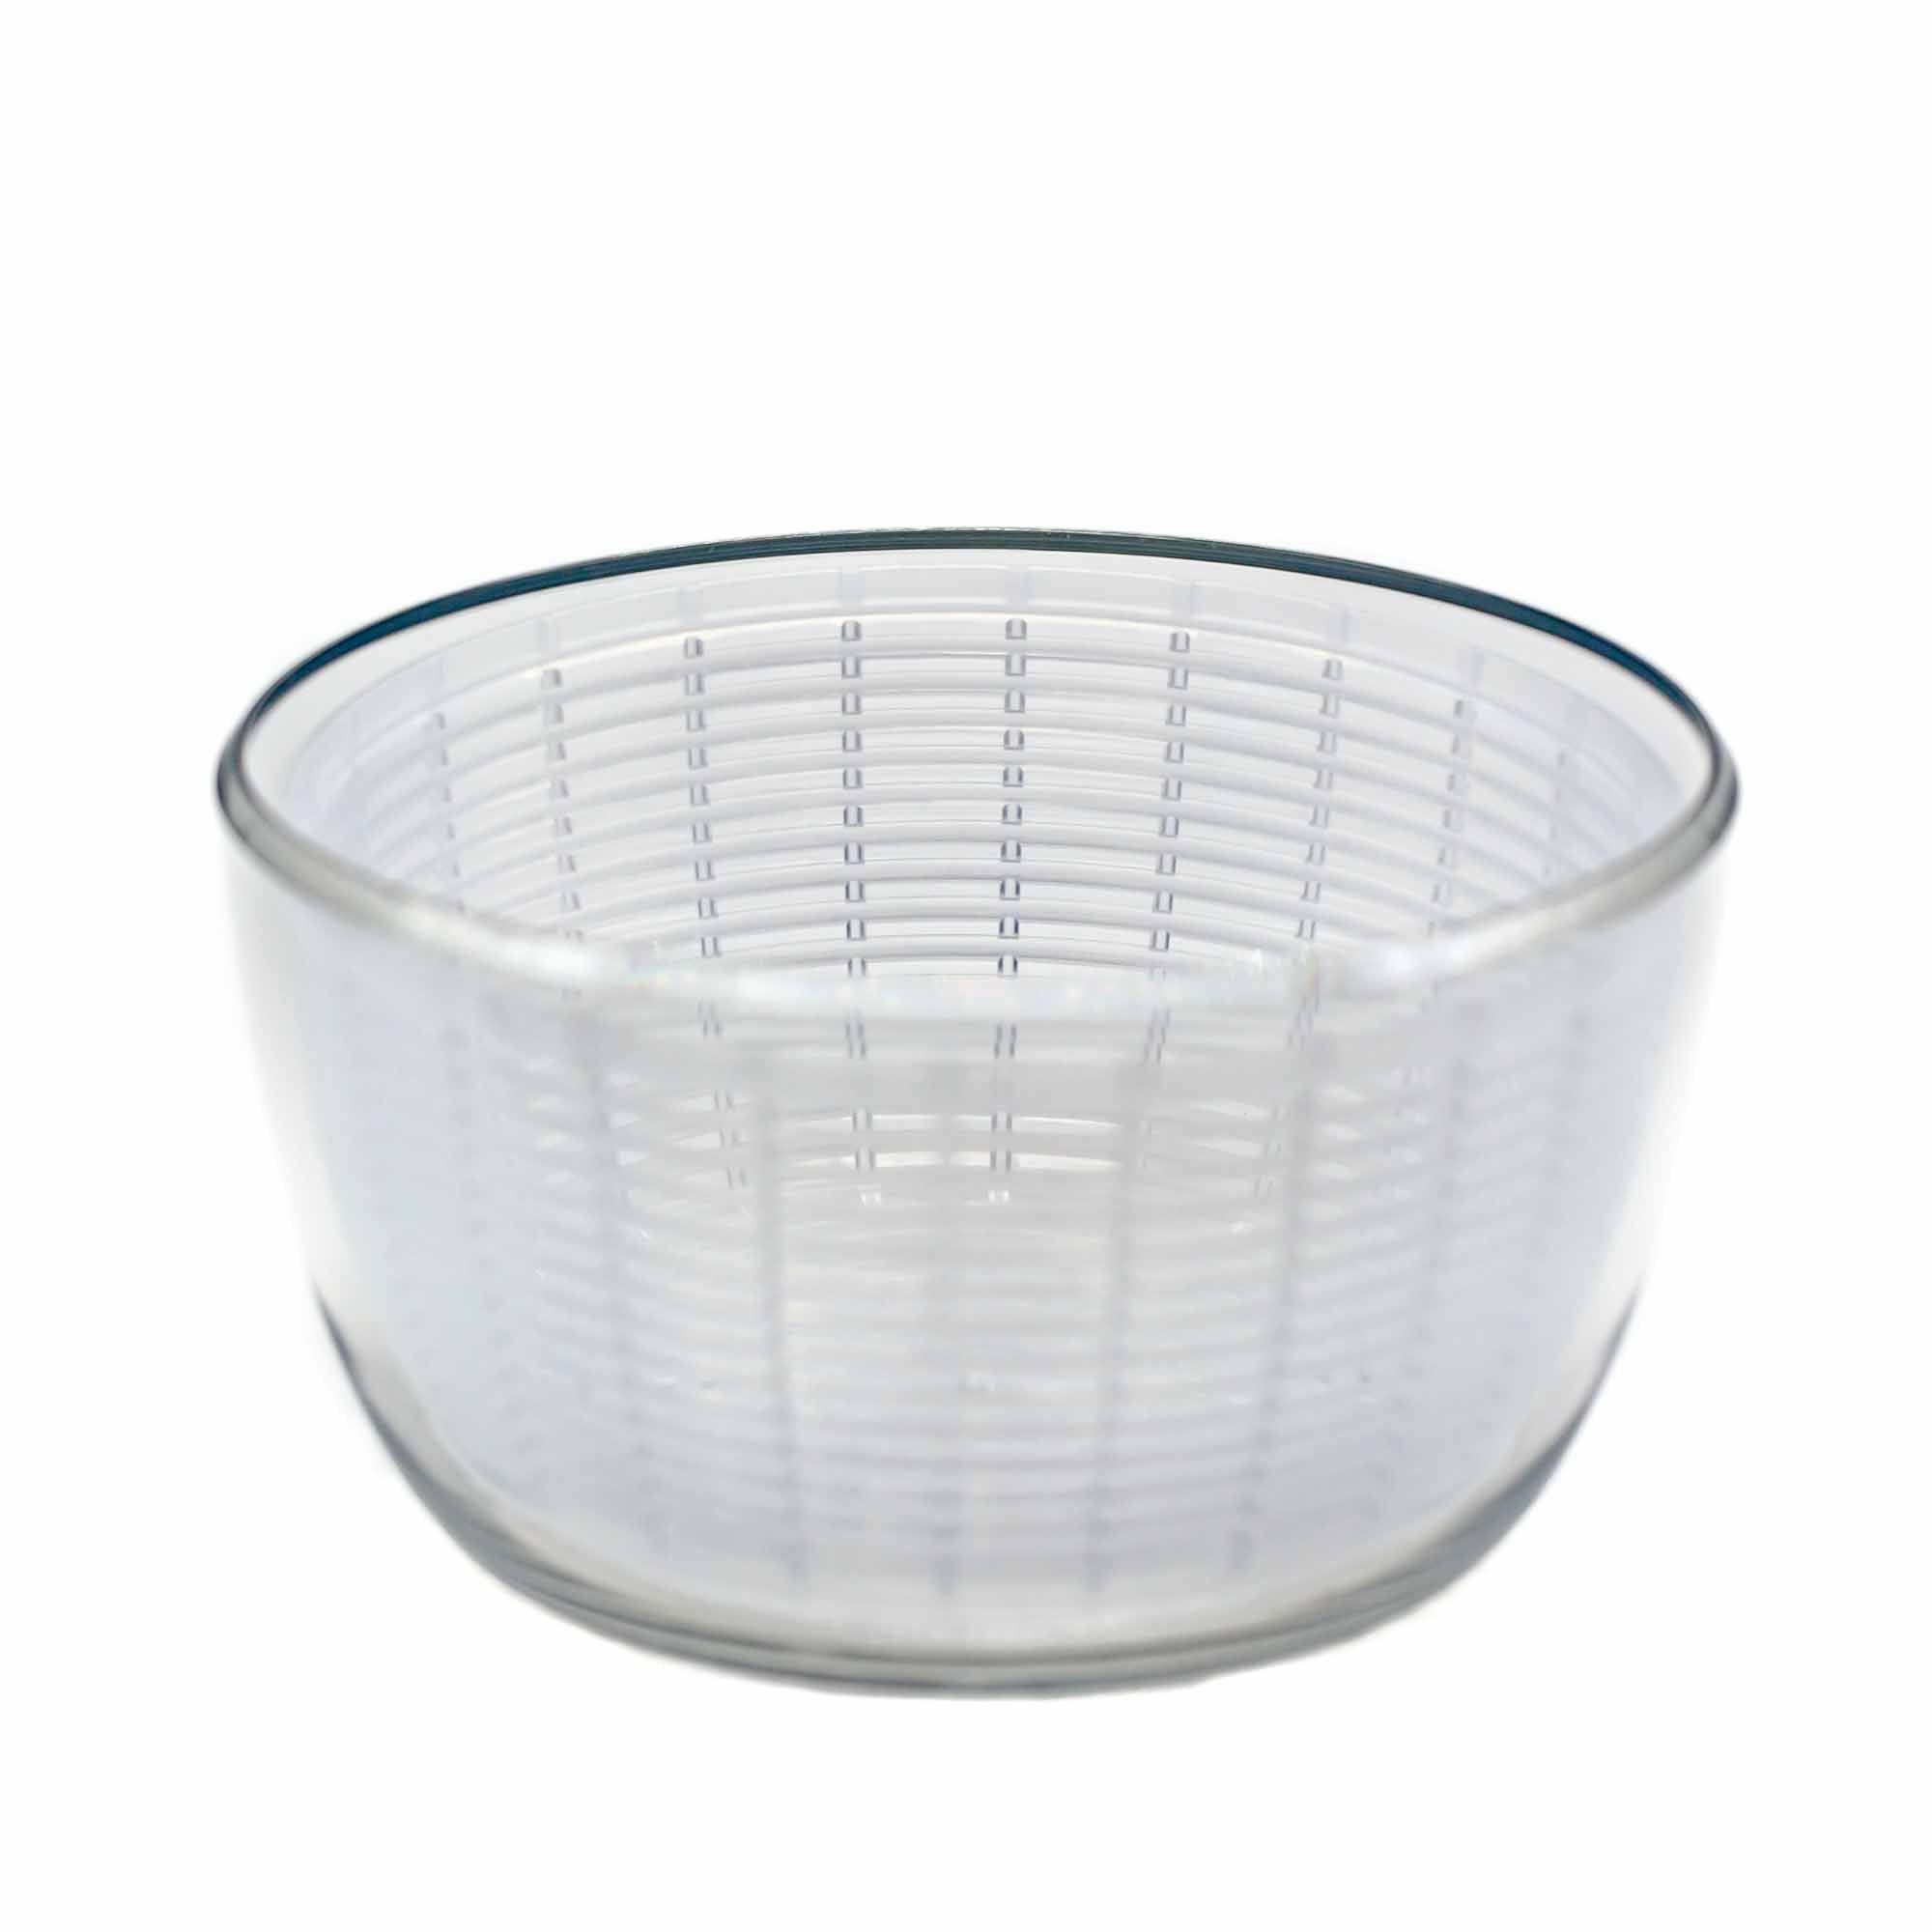 OXO Good Grips Salad Spinner - Mortise And Tenon